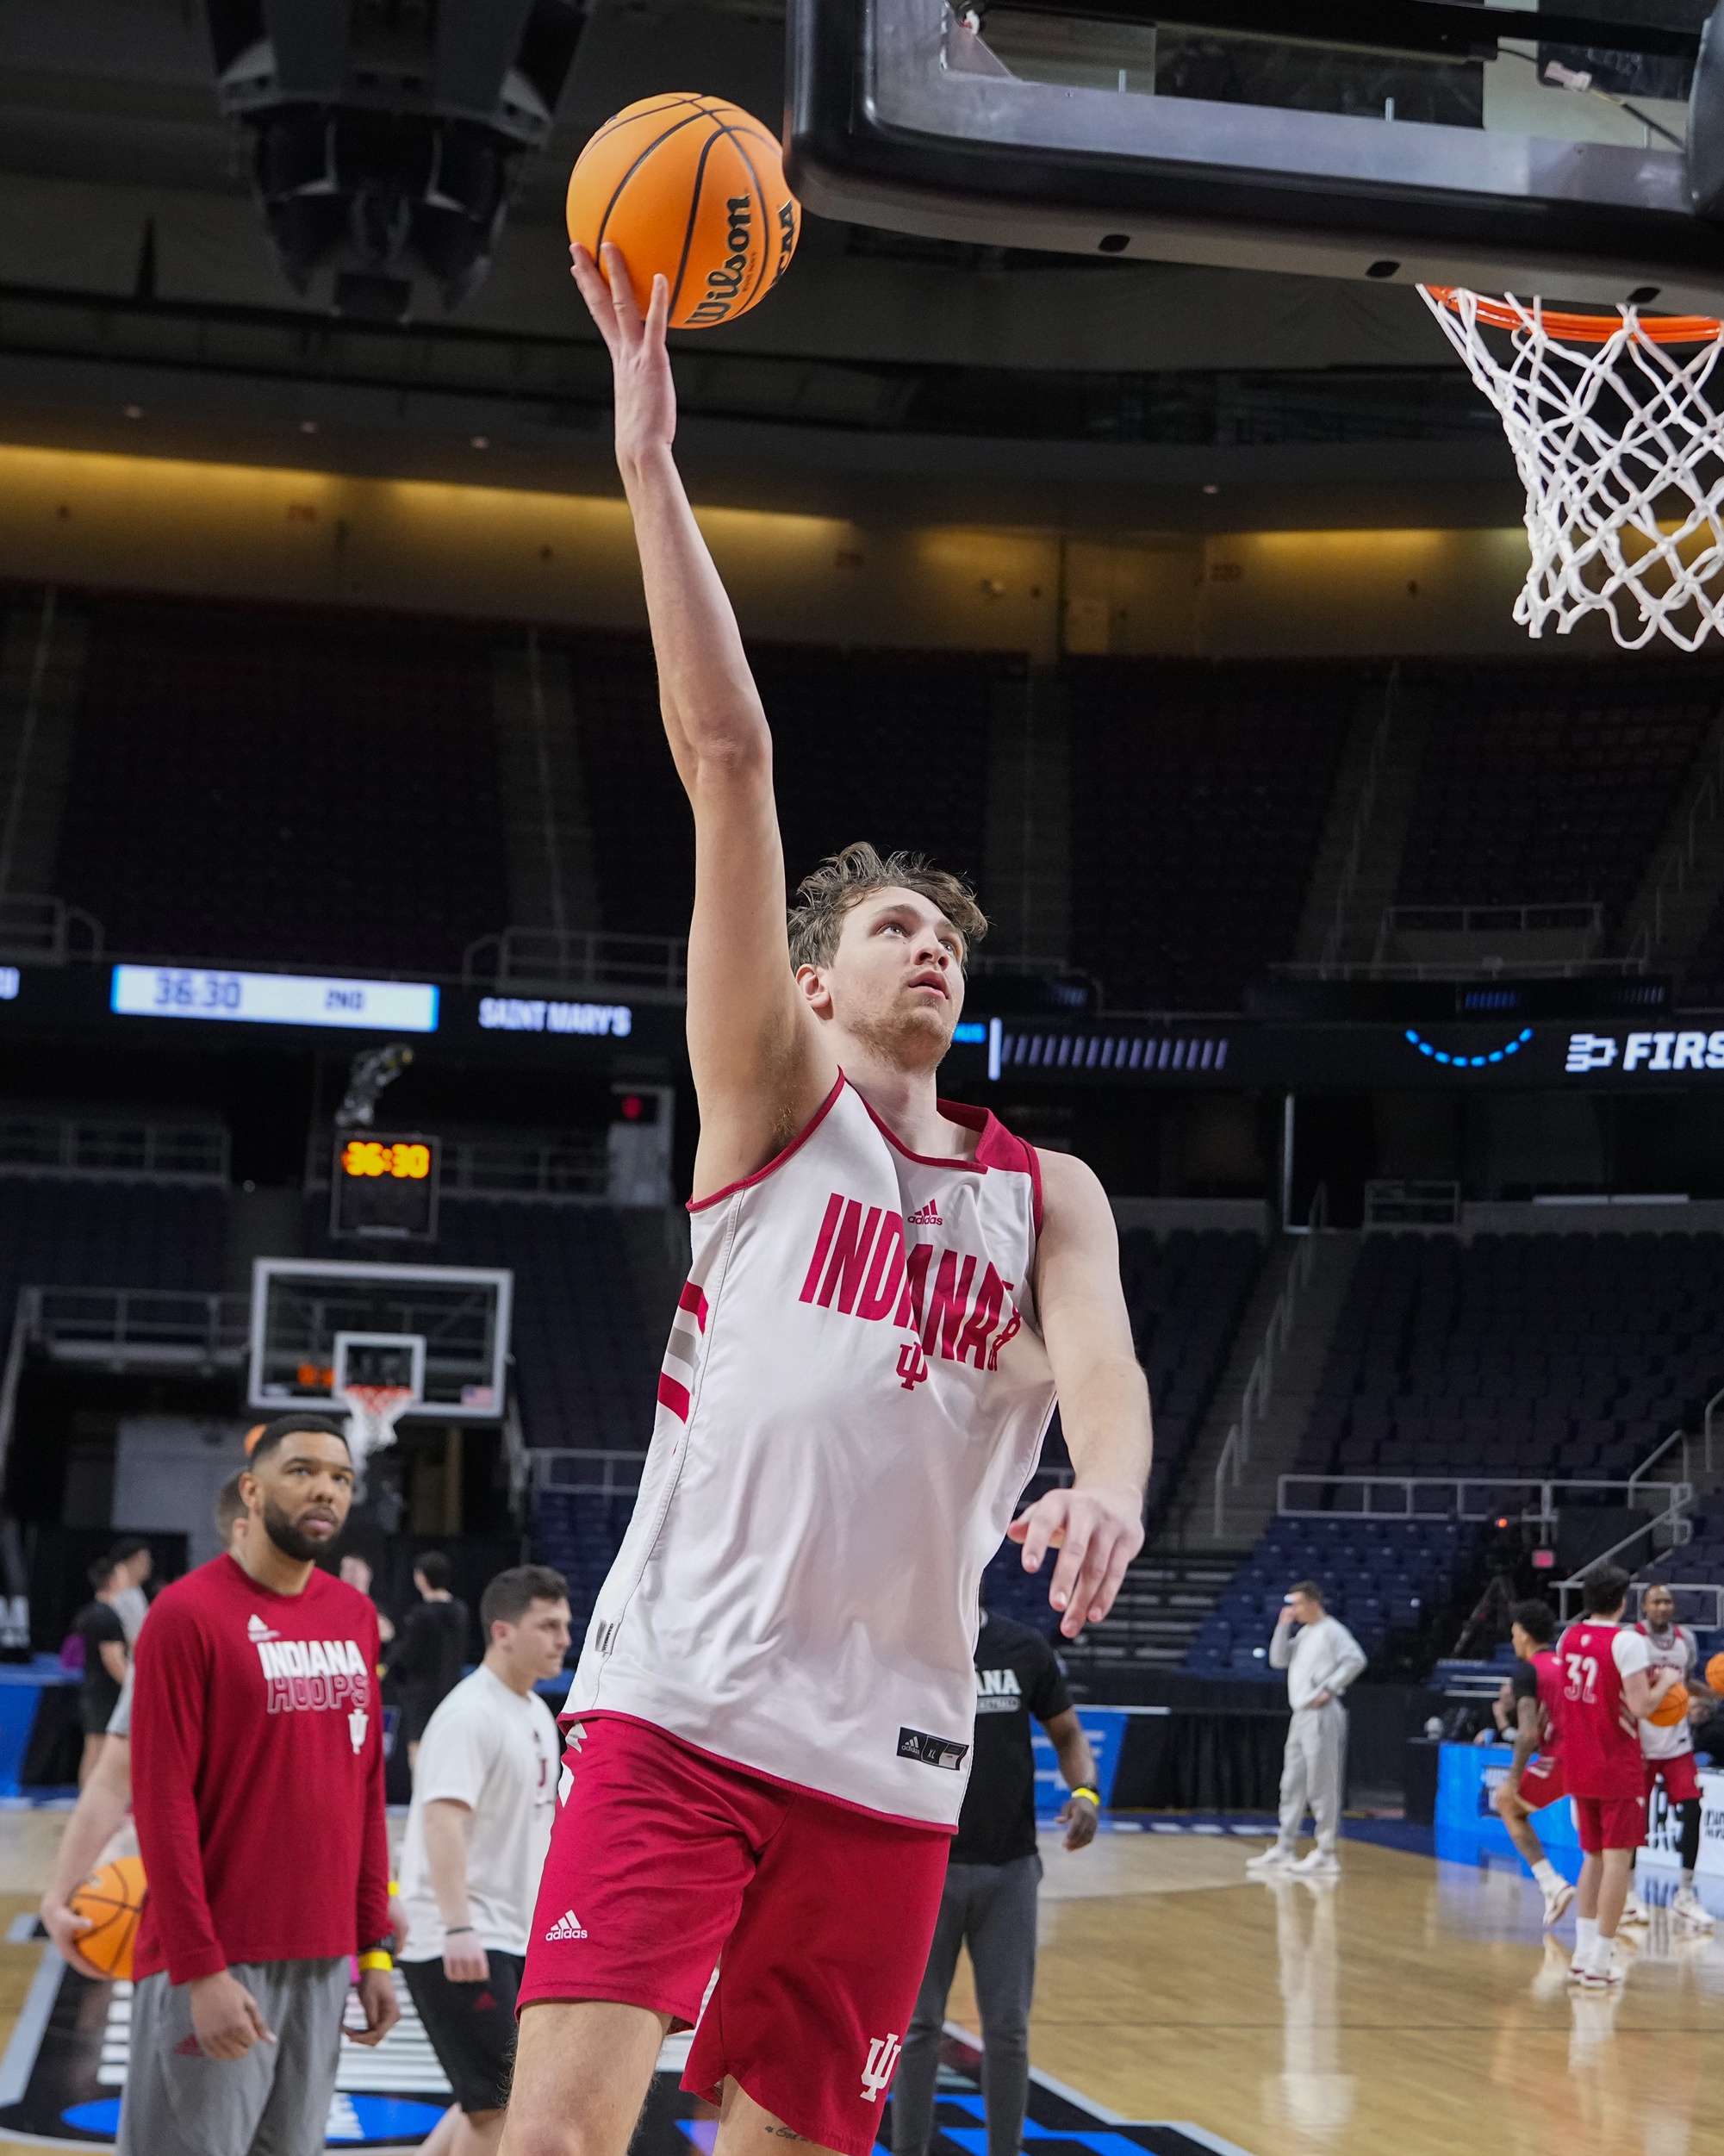 Indiana Hoosiers center Logan Duncomb (51) shoots a layup during the practice session at MVP Arena.